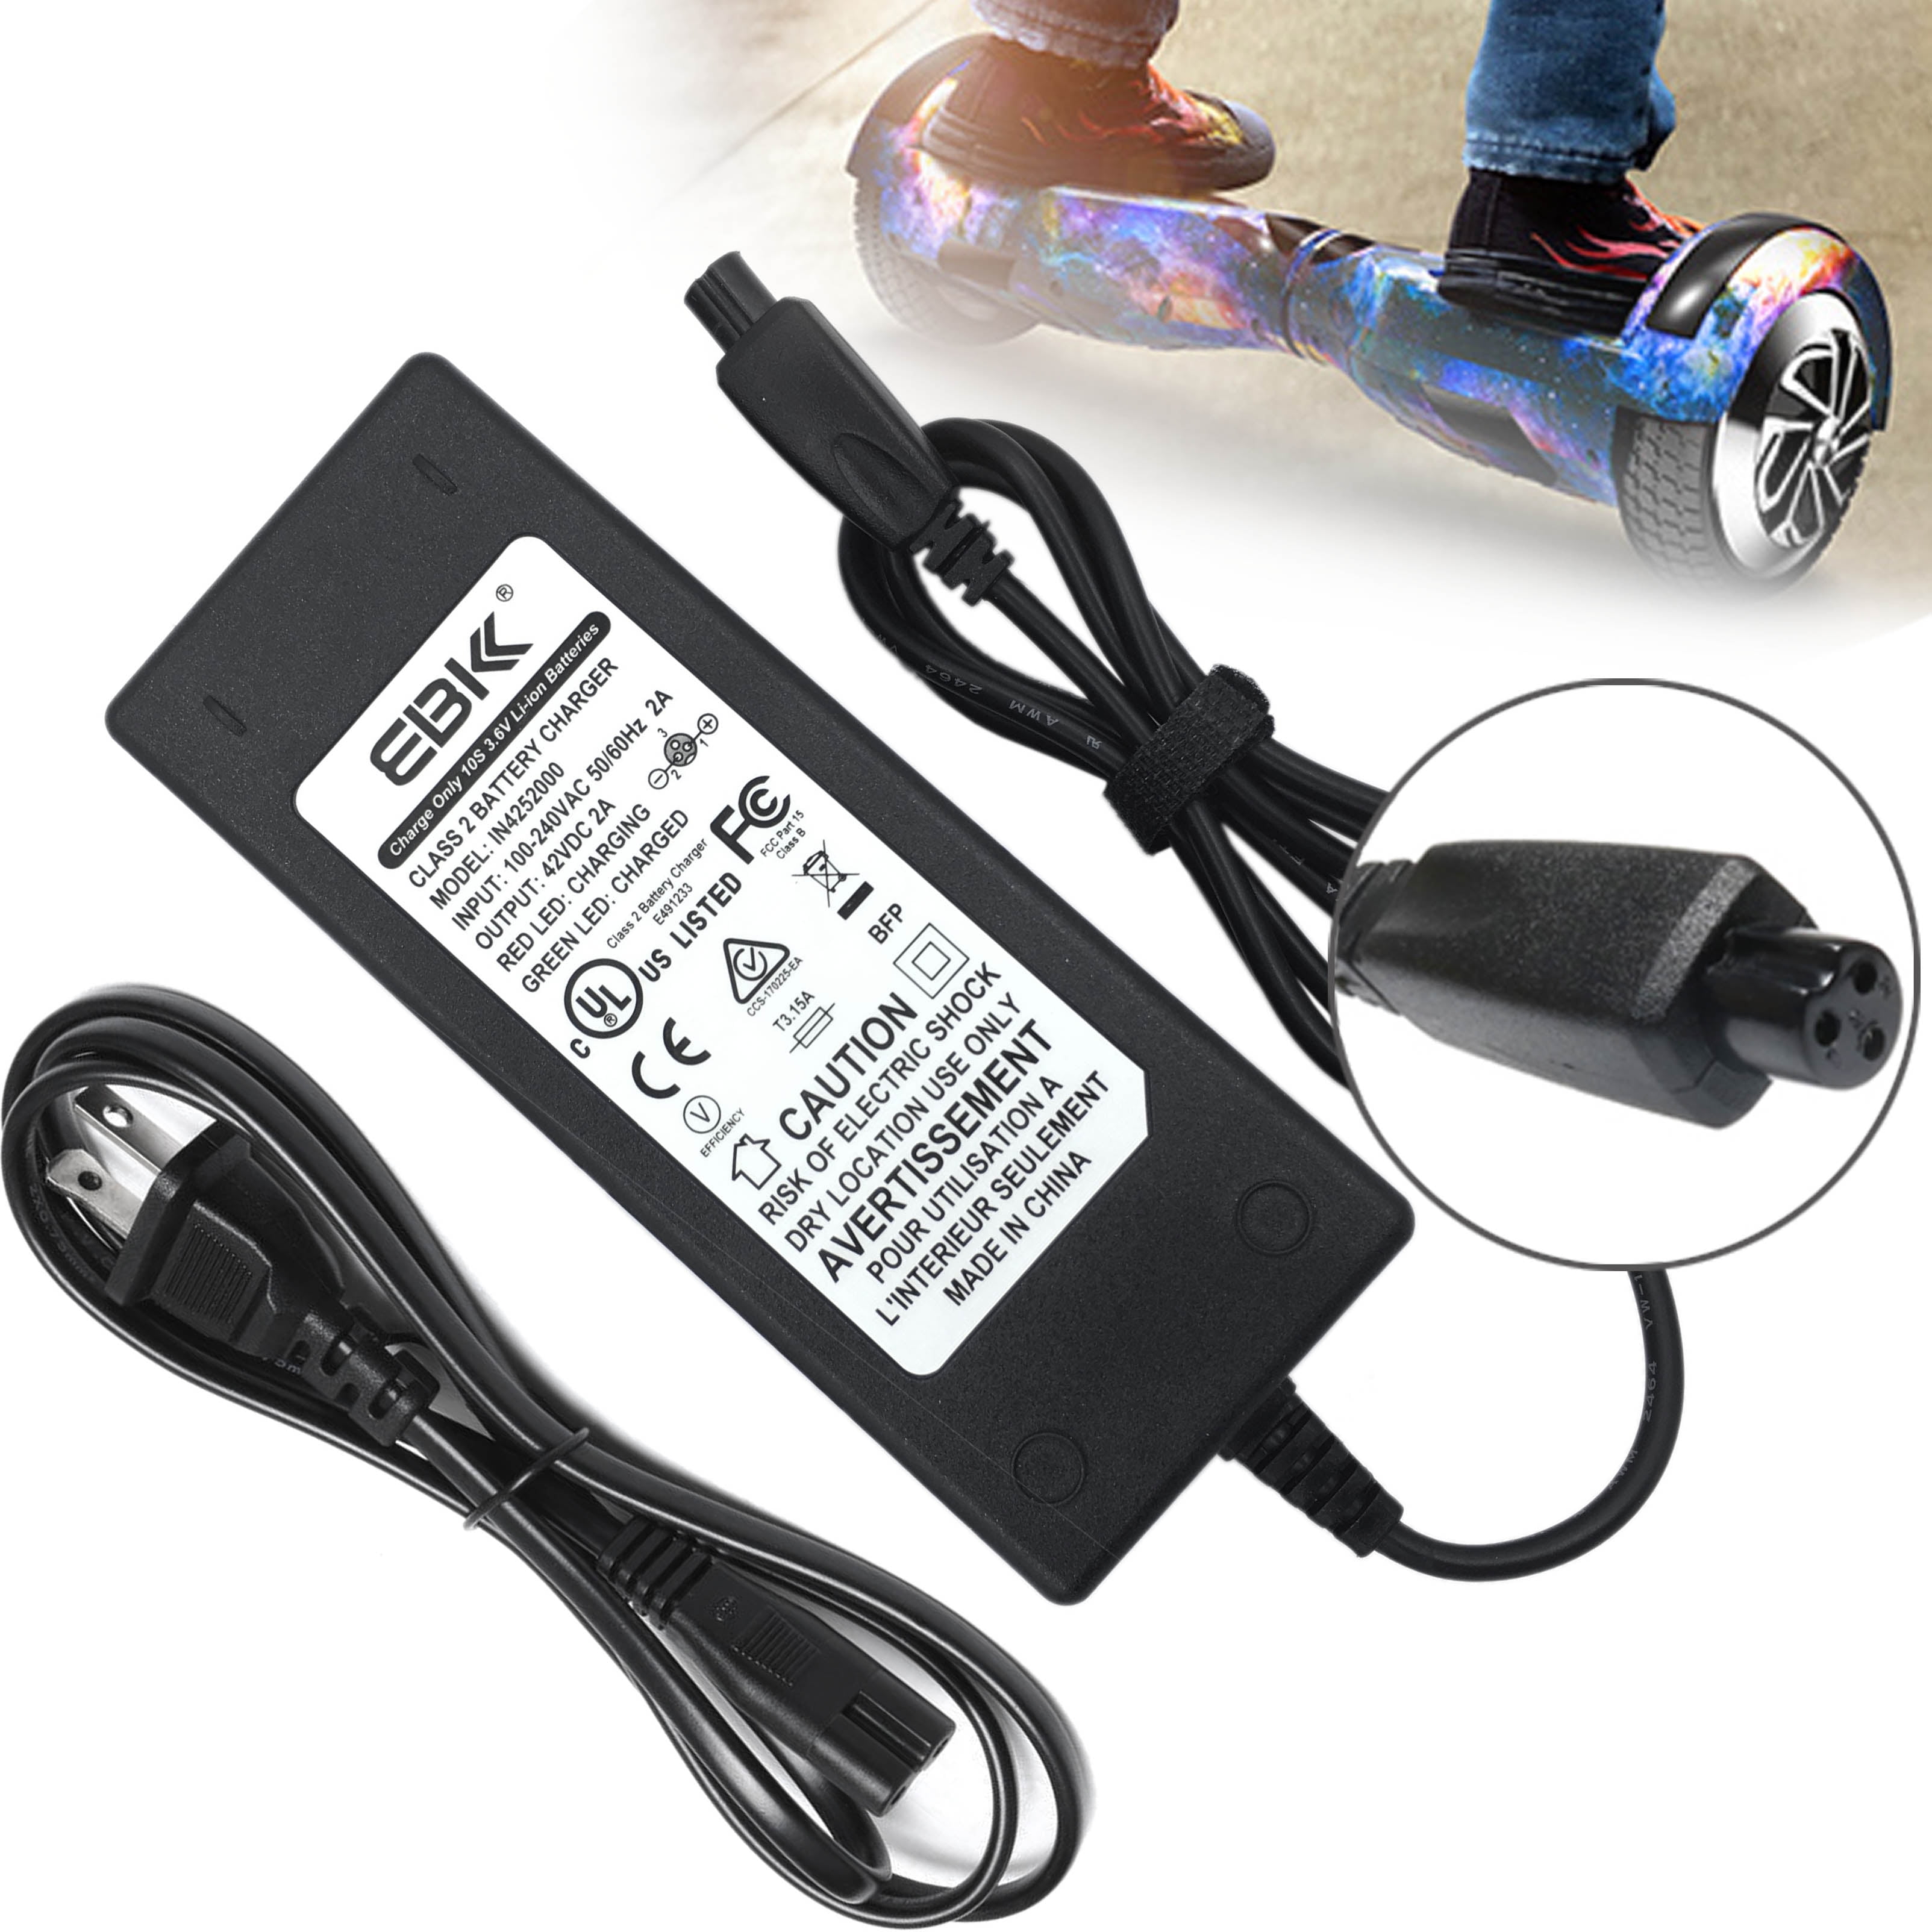 36 Volt Lithium Battery Charger for the Powerboard Hoverboard 